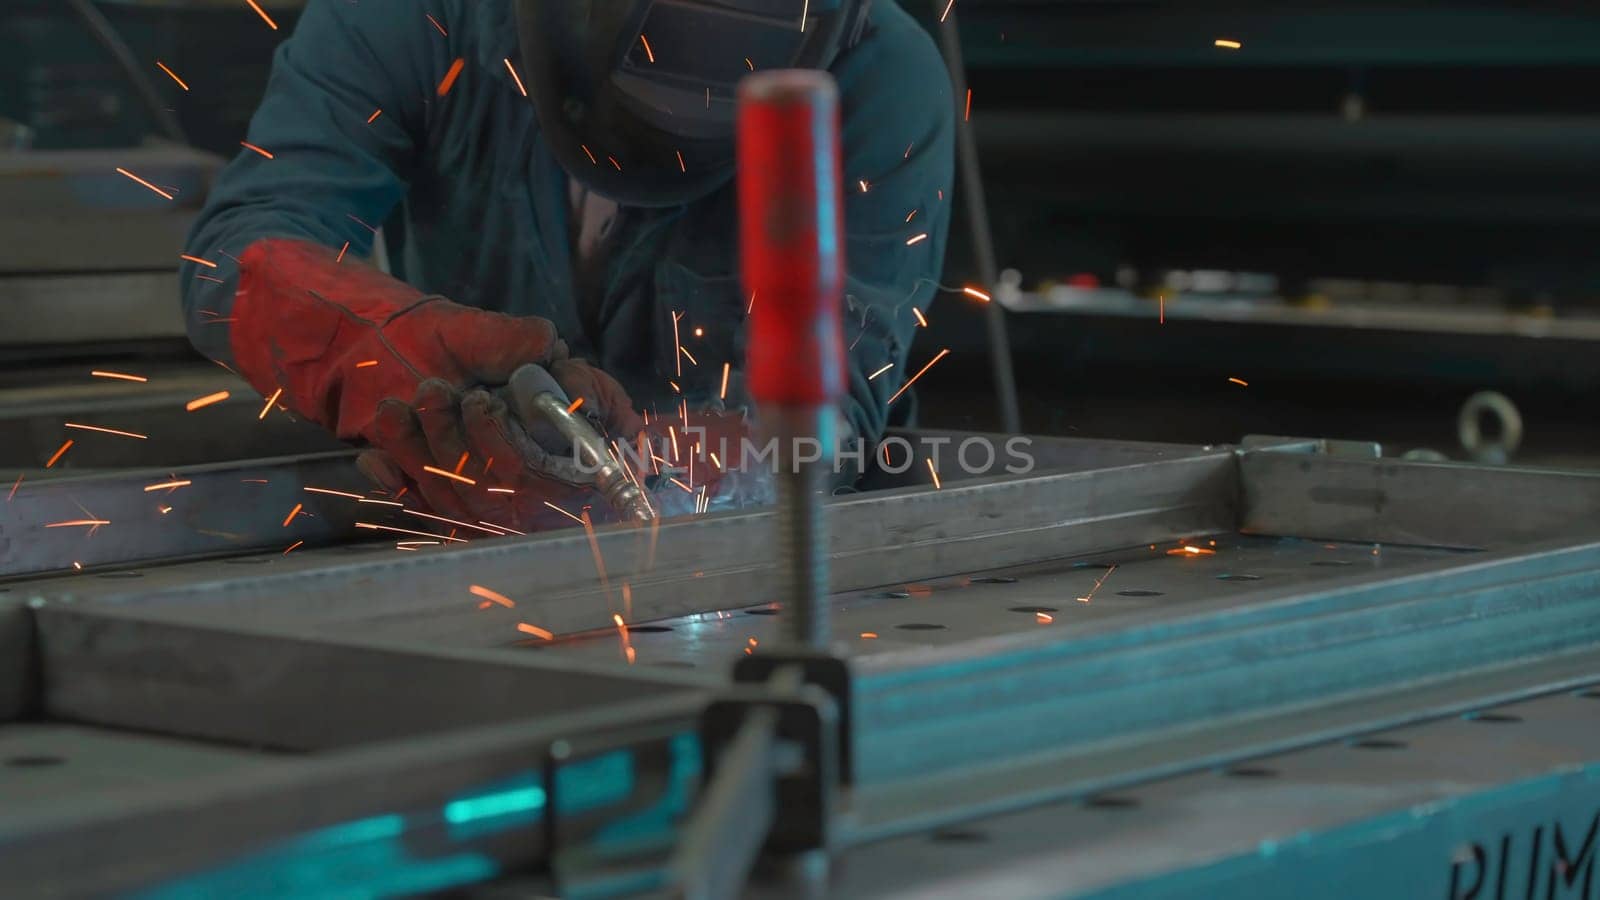 Man in mask works with welding metal structures at factory. Creative. Welder in equipment works at industrial plant. Worker with welding and welding sparks from metal.